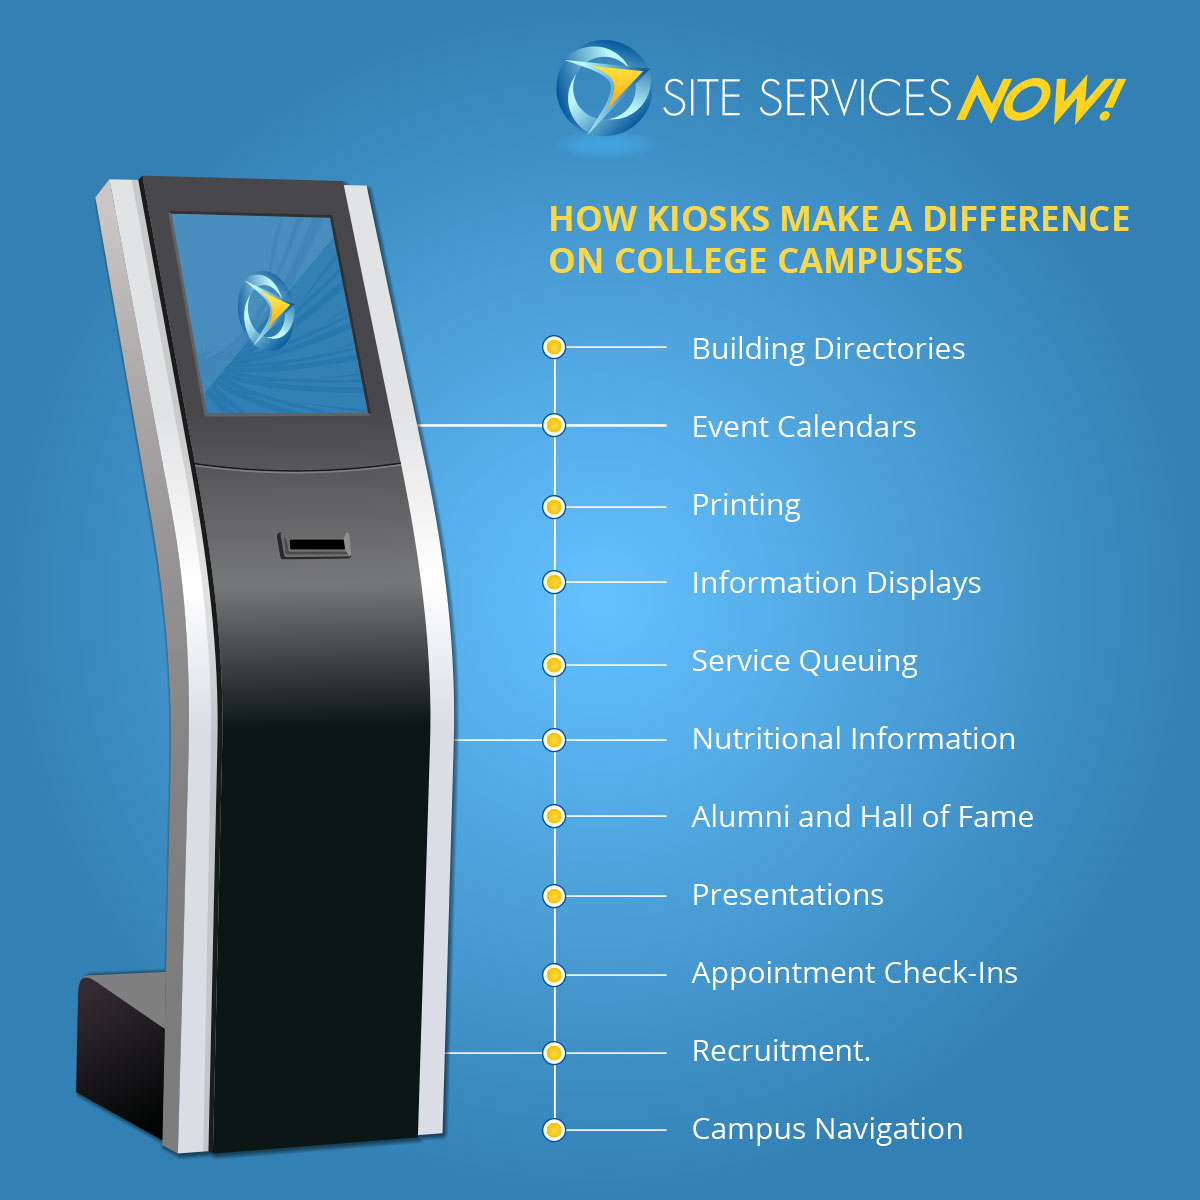 How Kiosks Make a Difference on College Campuses Infographic